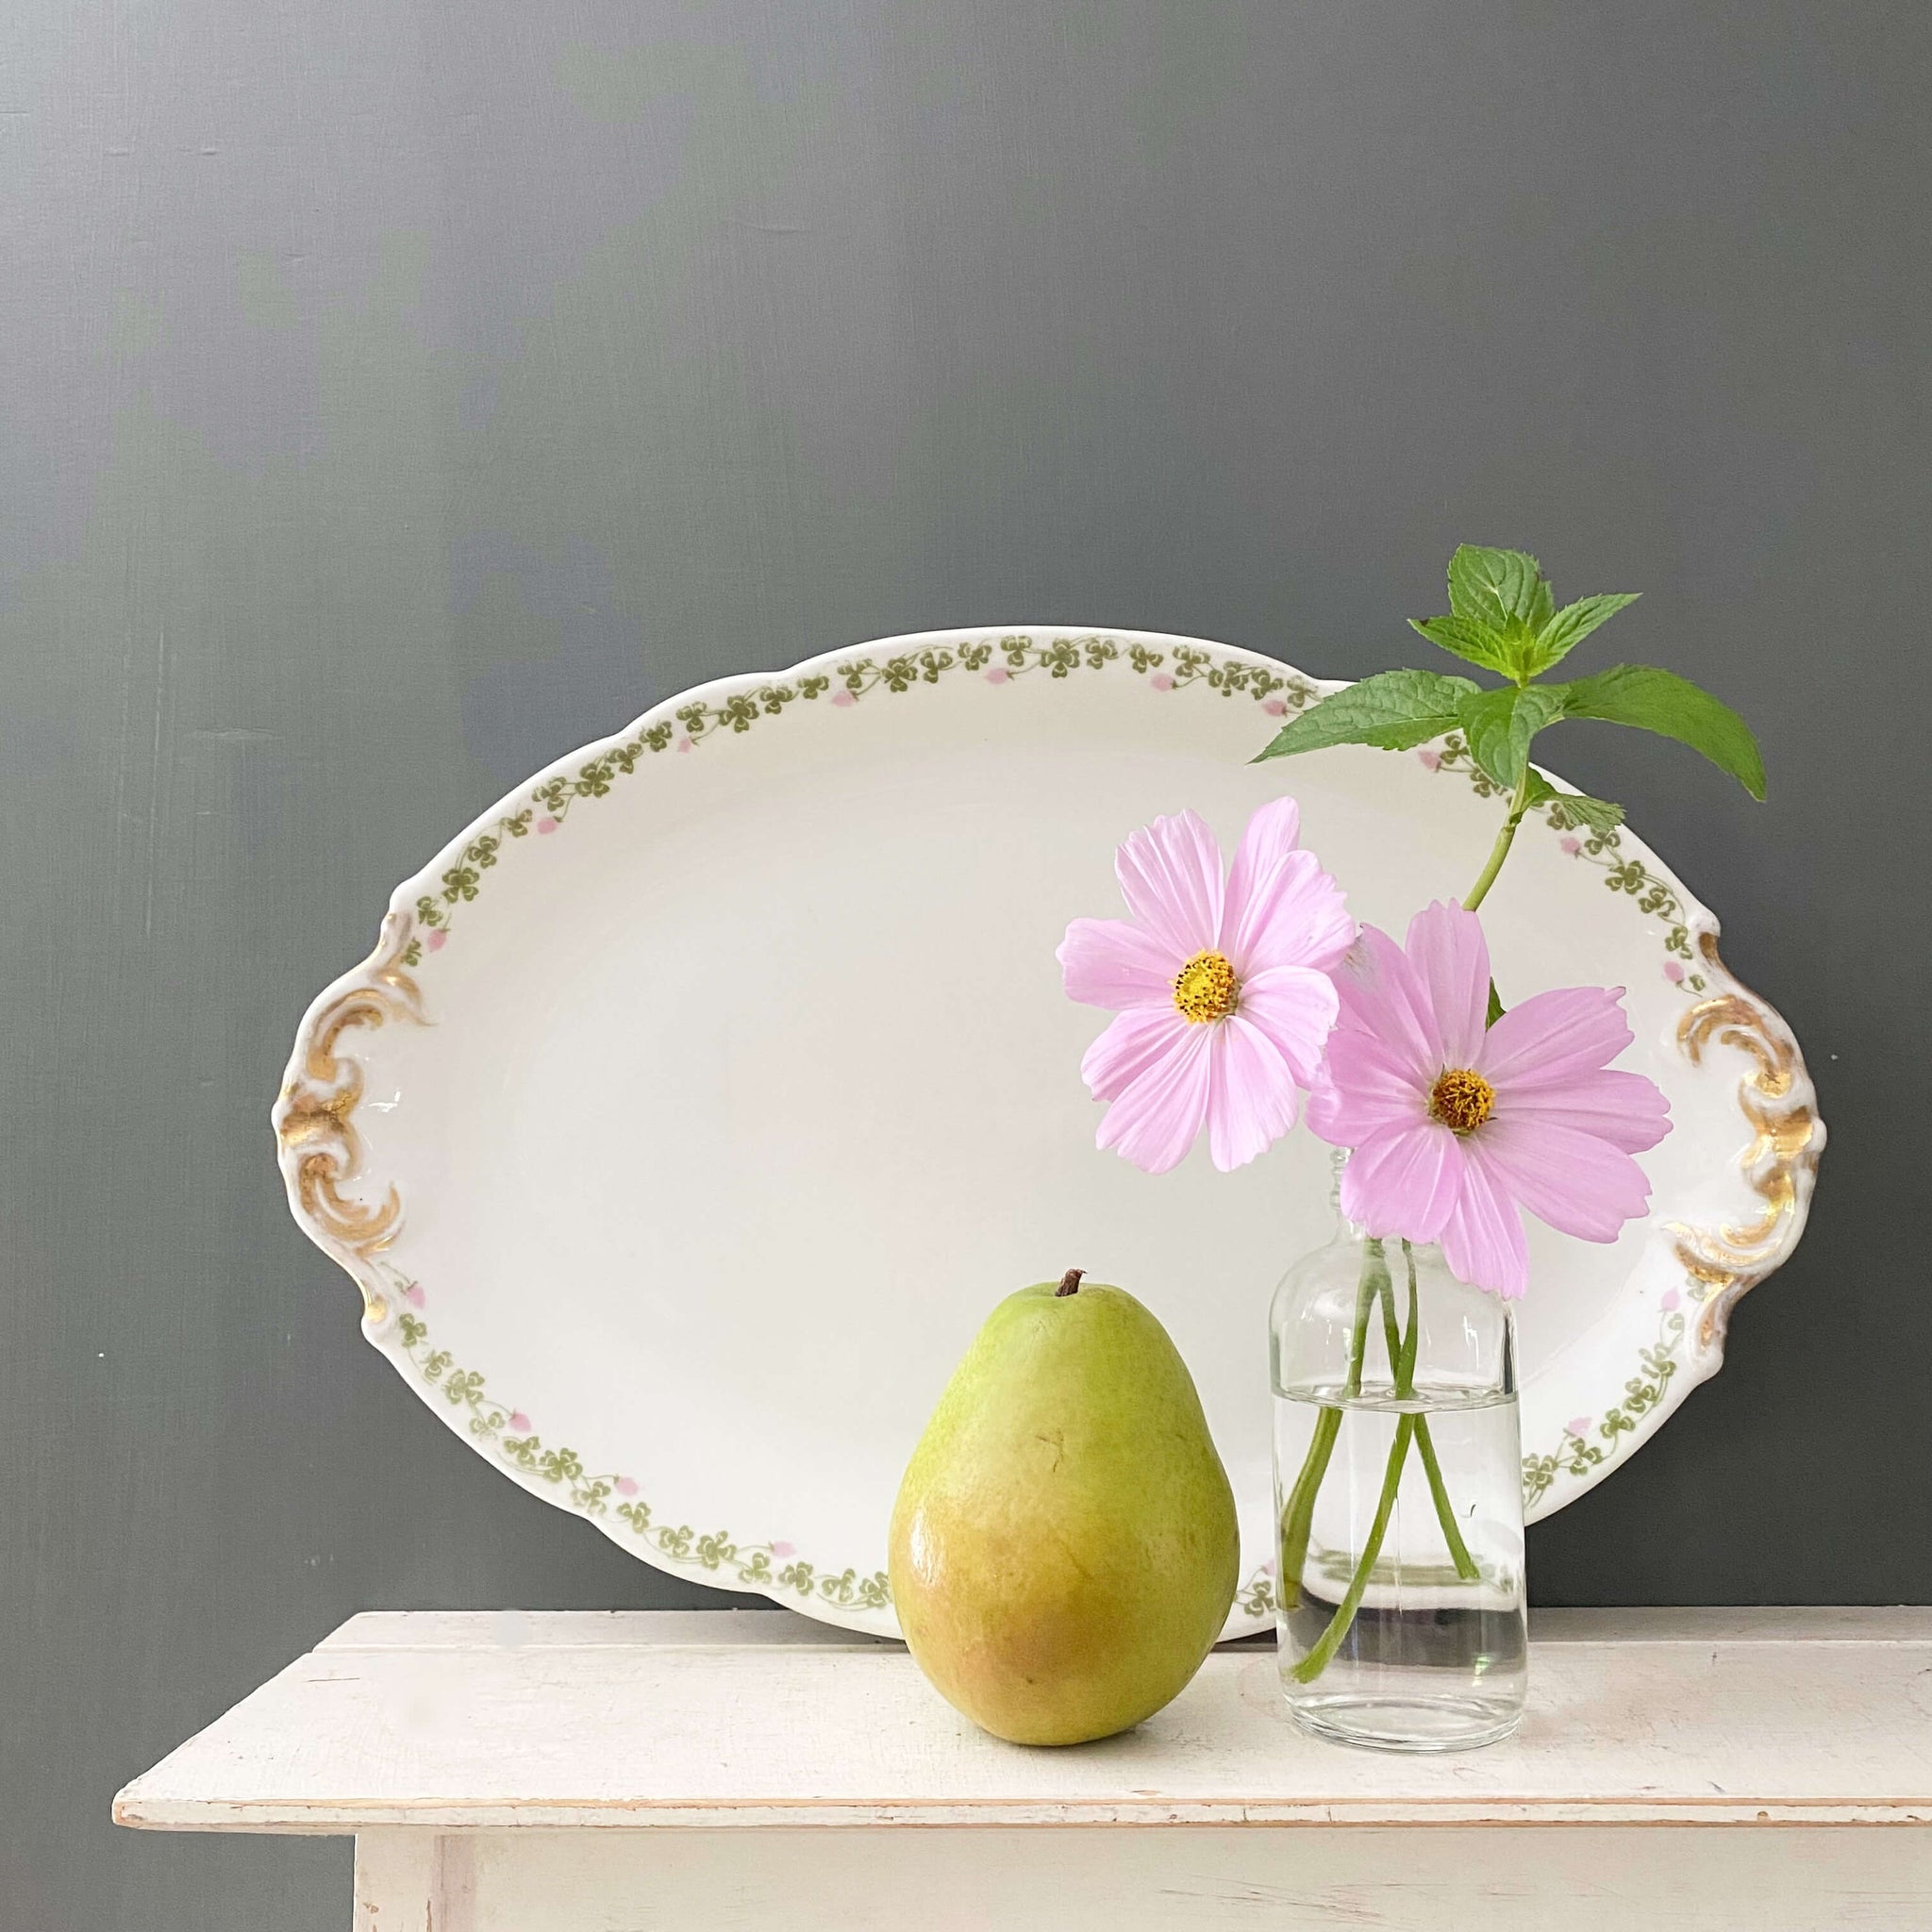 Antique French Limoges Platter with Green Clover Pattern circa 1900s by Bernardaud a Cie